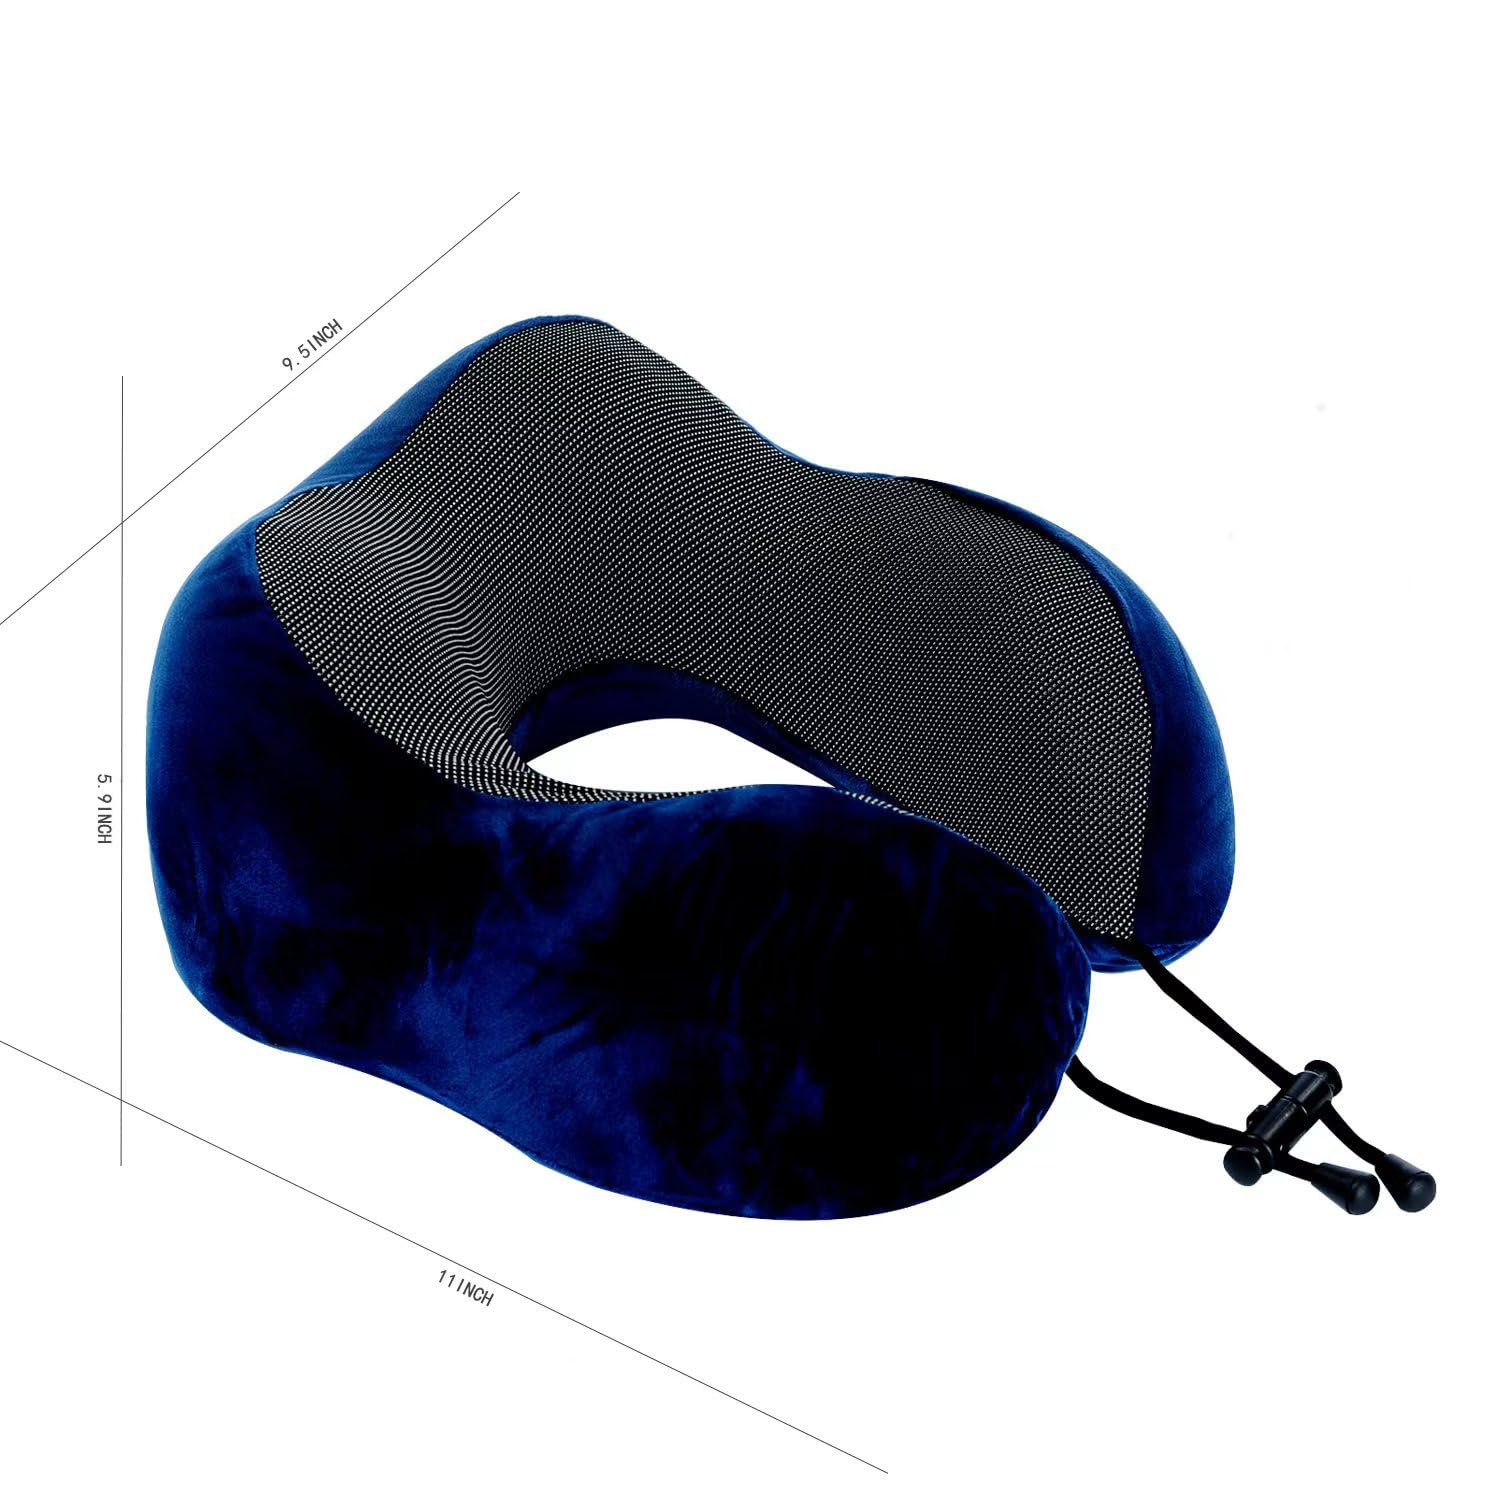 Makimoo Memory Foam Travel Pillow, Neck Pillow with 360-Degree Head Support, Comfortable and Lightweight, Ideal for Sleeping on Airplane, Car, Train, Bus and Home Use, Comes with Storage Bag (Blue)